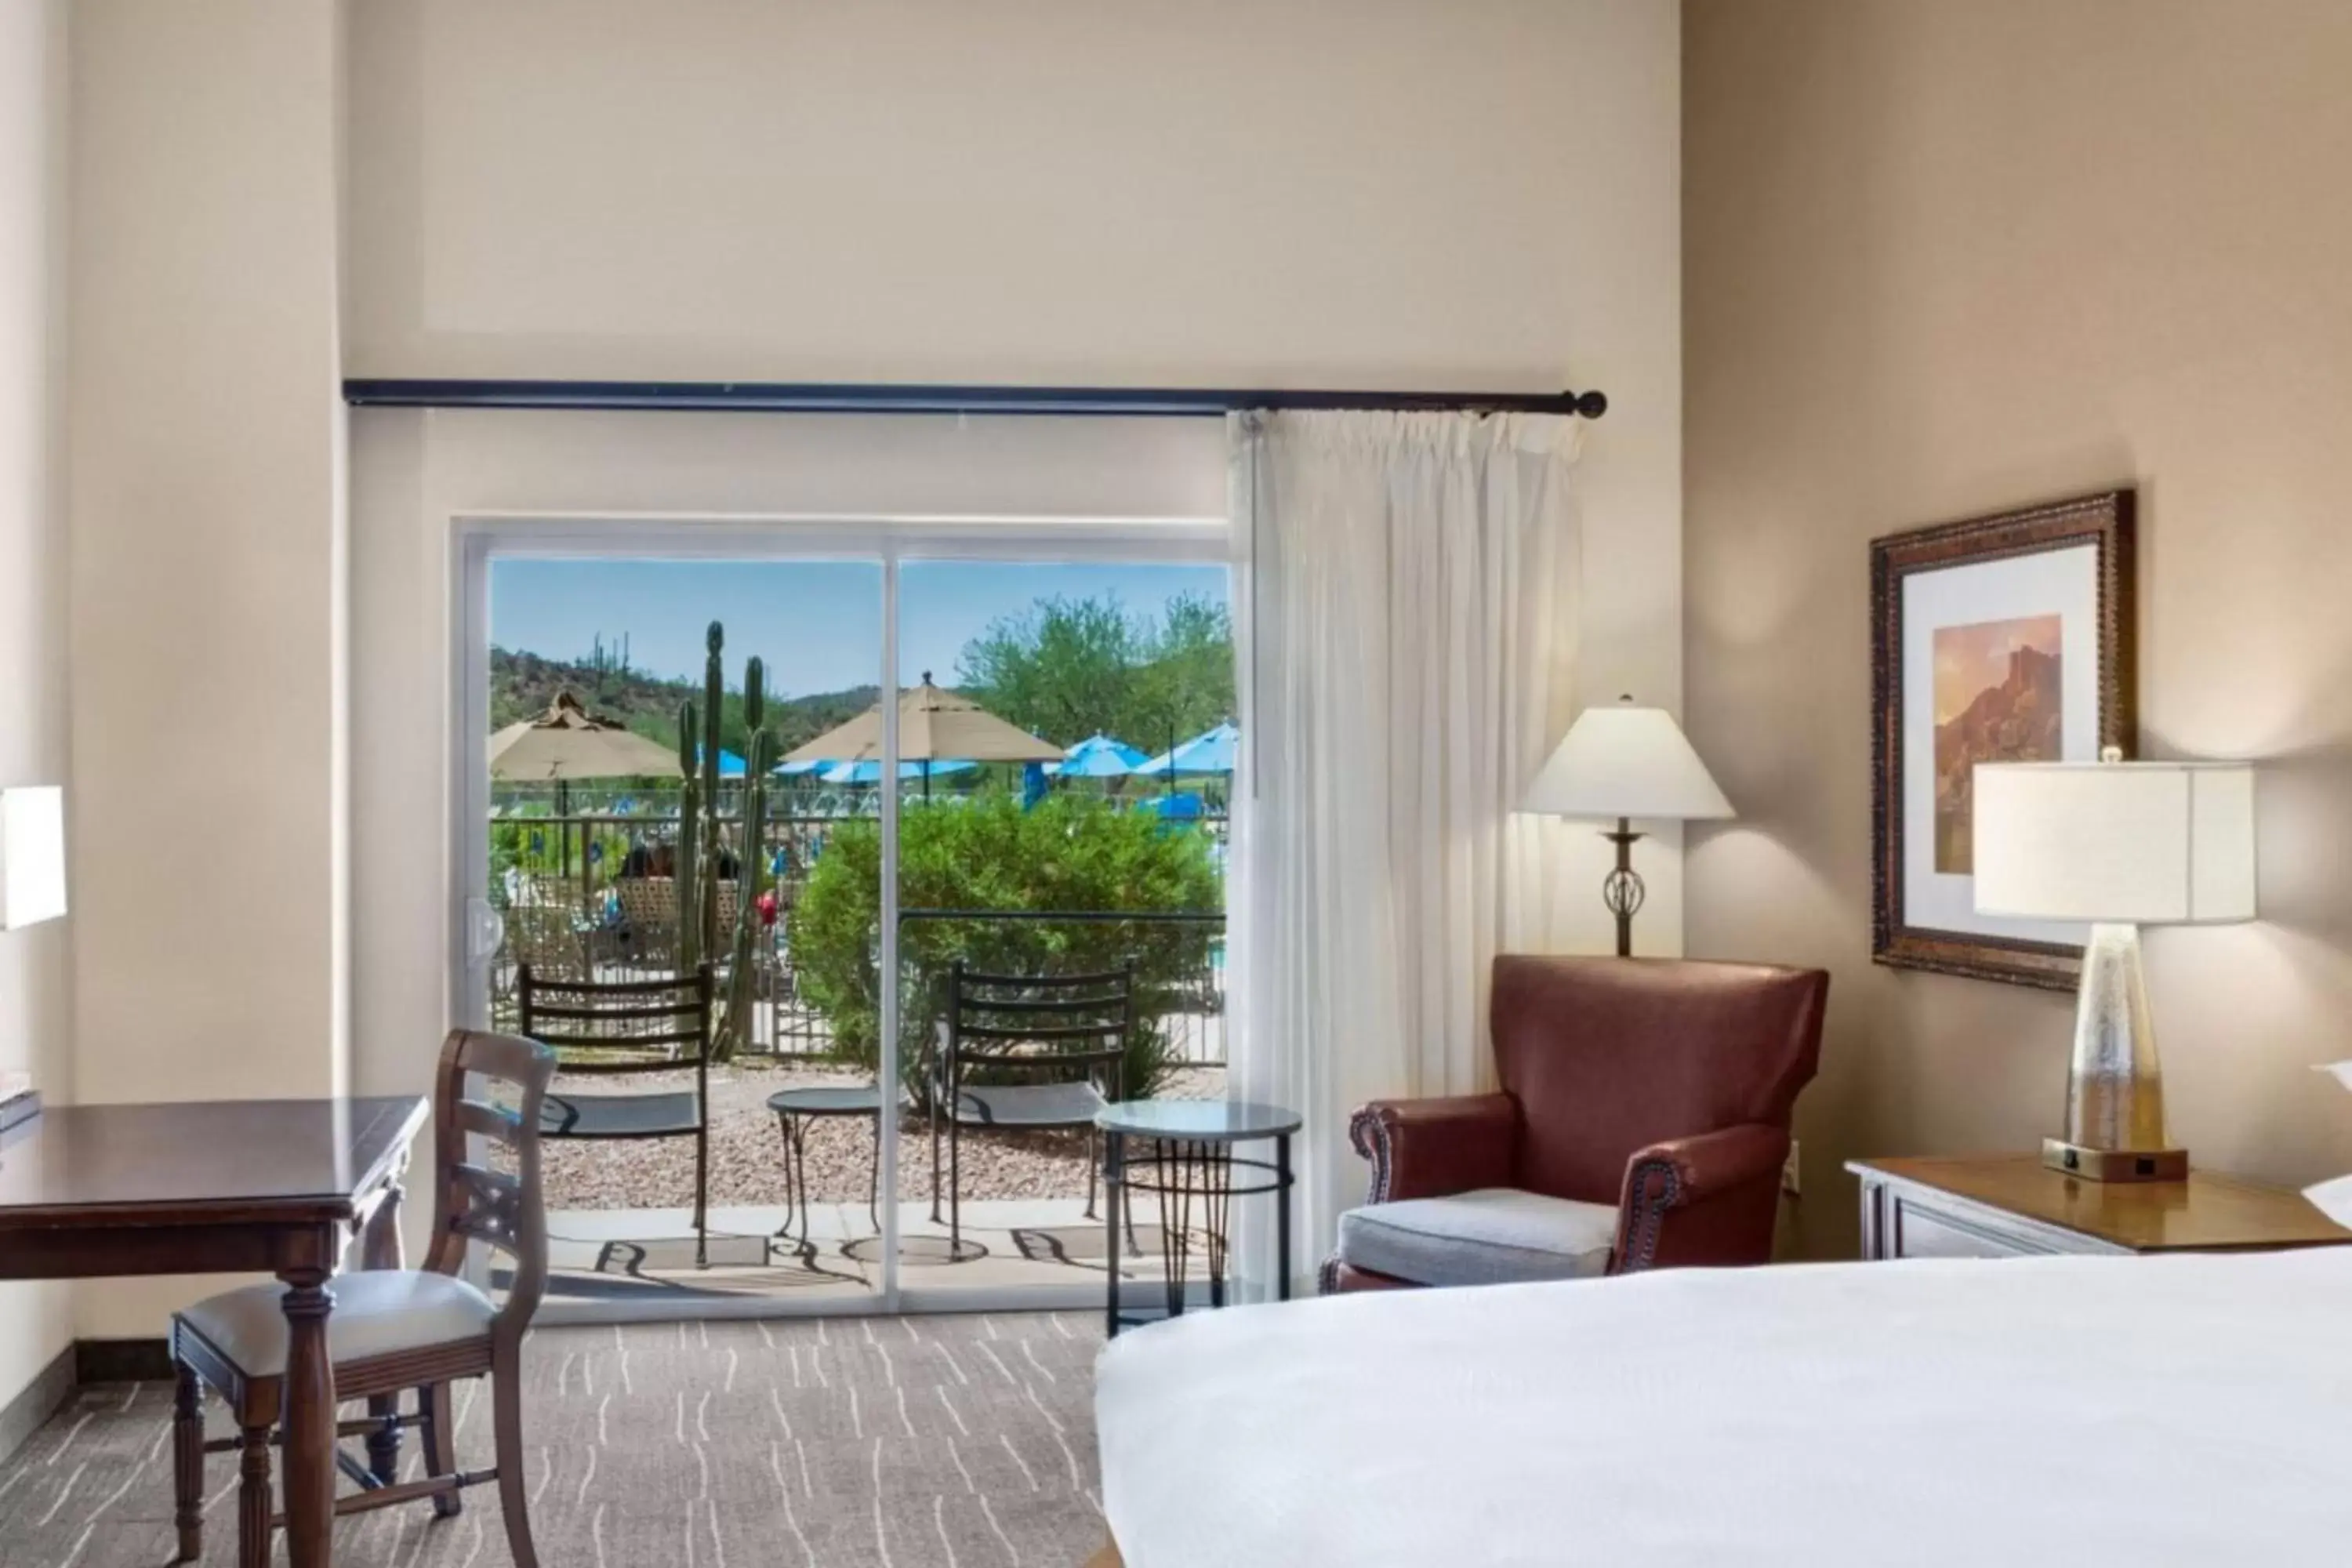 King Room with Patio and Pool View - Poolside in JW Marriott Tucson Starr Pass Resort